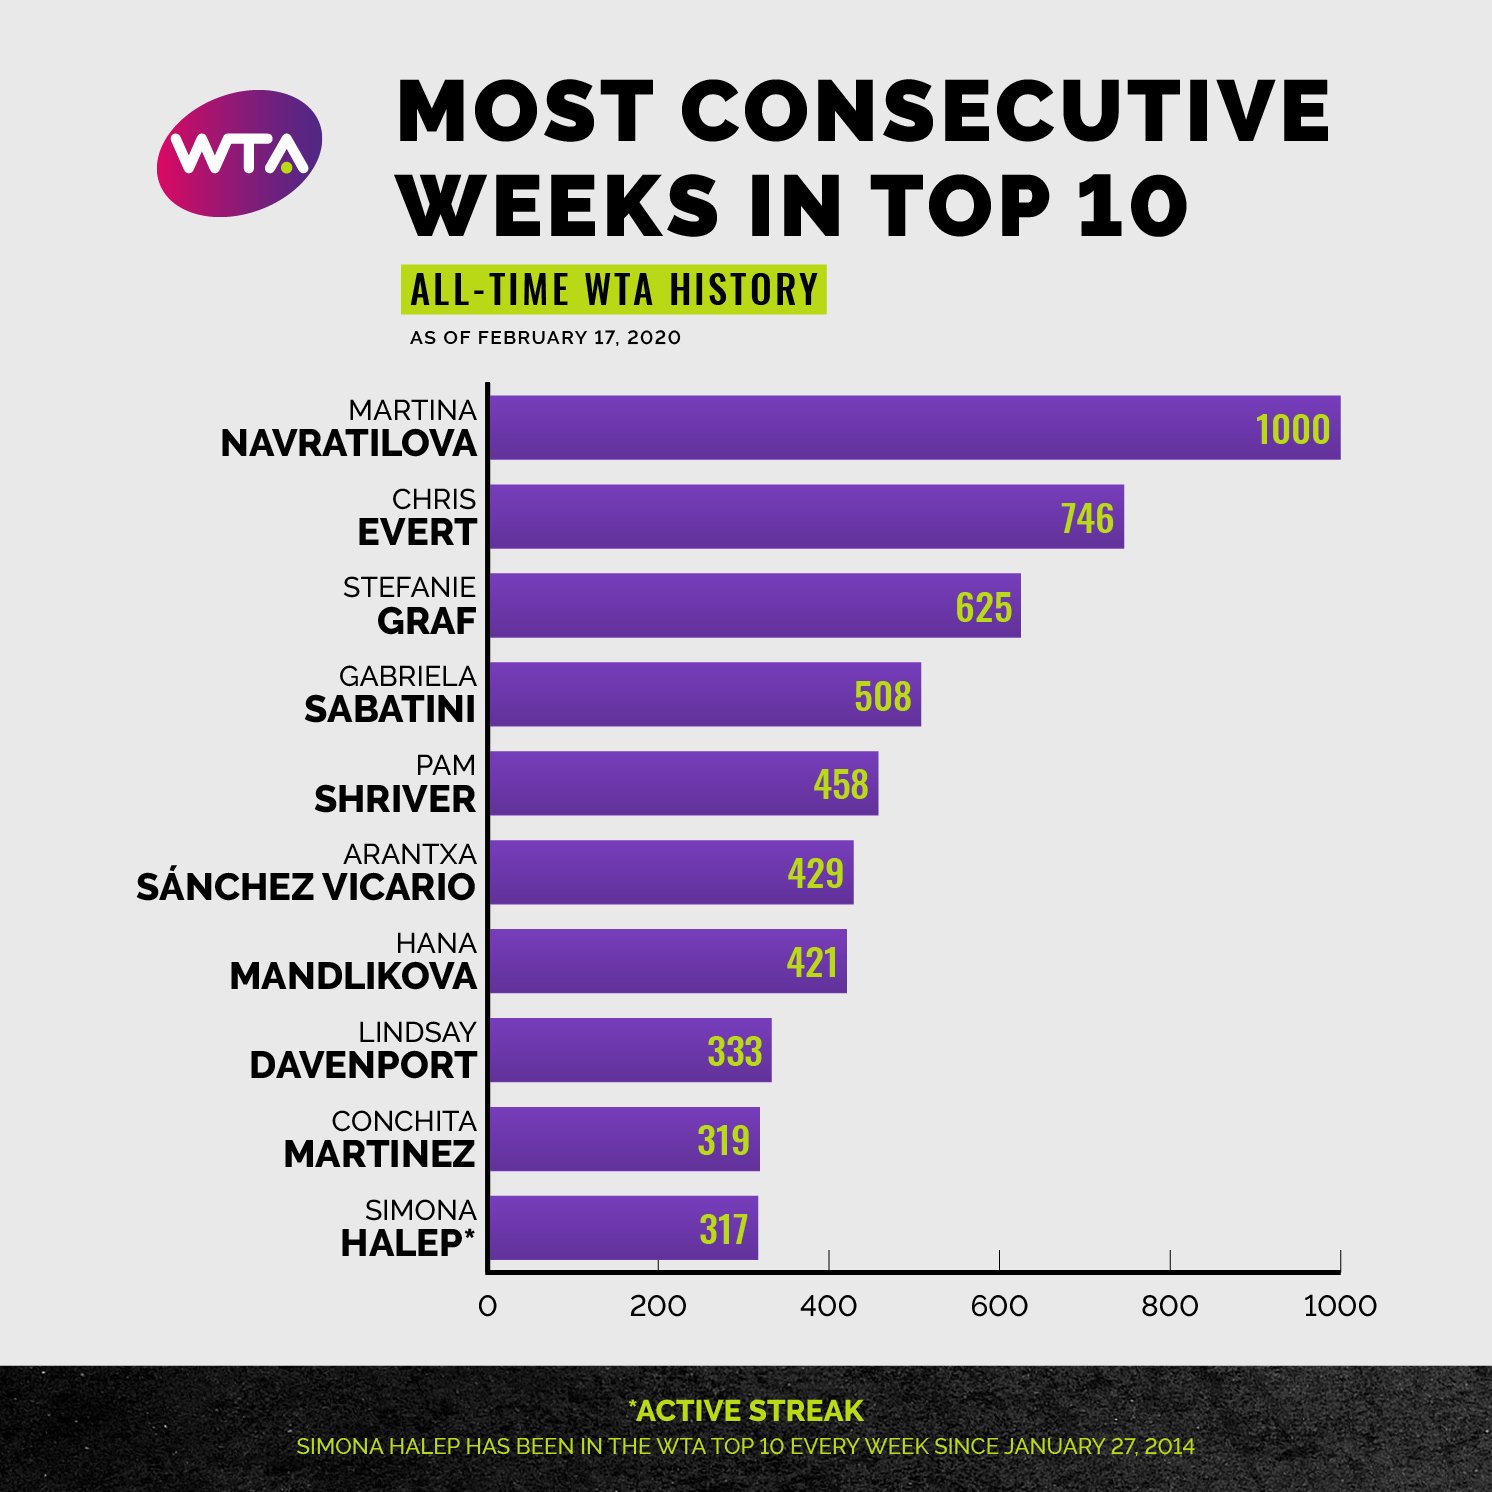 WTA Insider on Twitter: "Since making her Top 10 debut January 27, 2014, @Simona_Halep has ranked in the Top 10 for 317 consecutive weeks (6+ years). This is the 10th